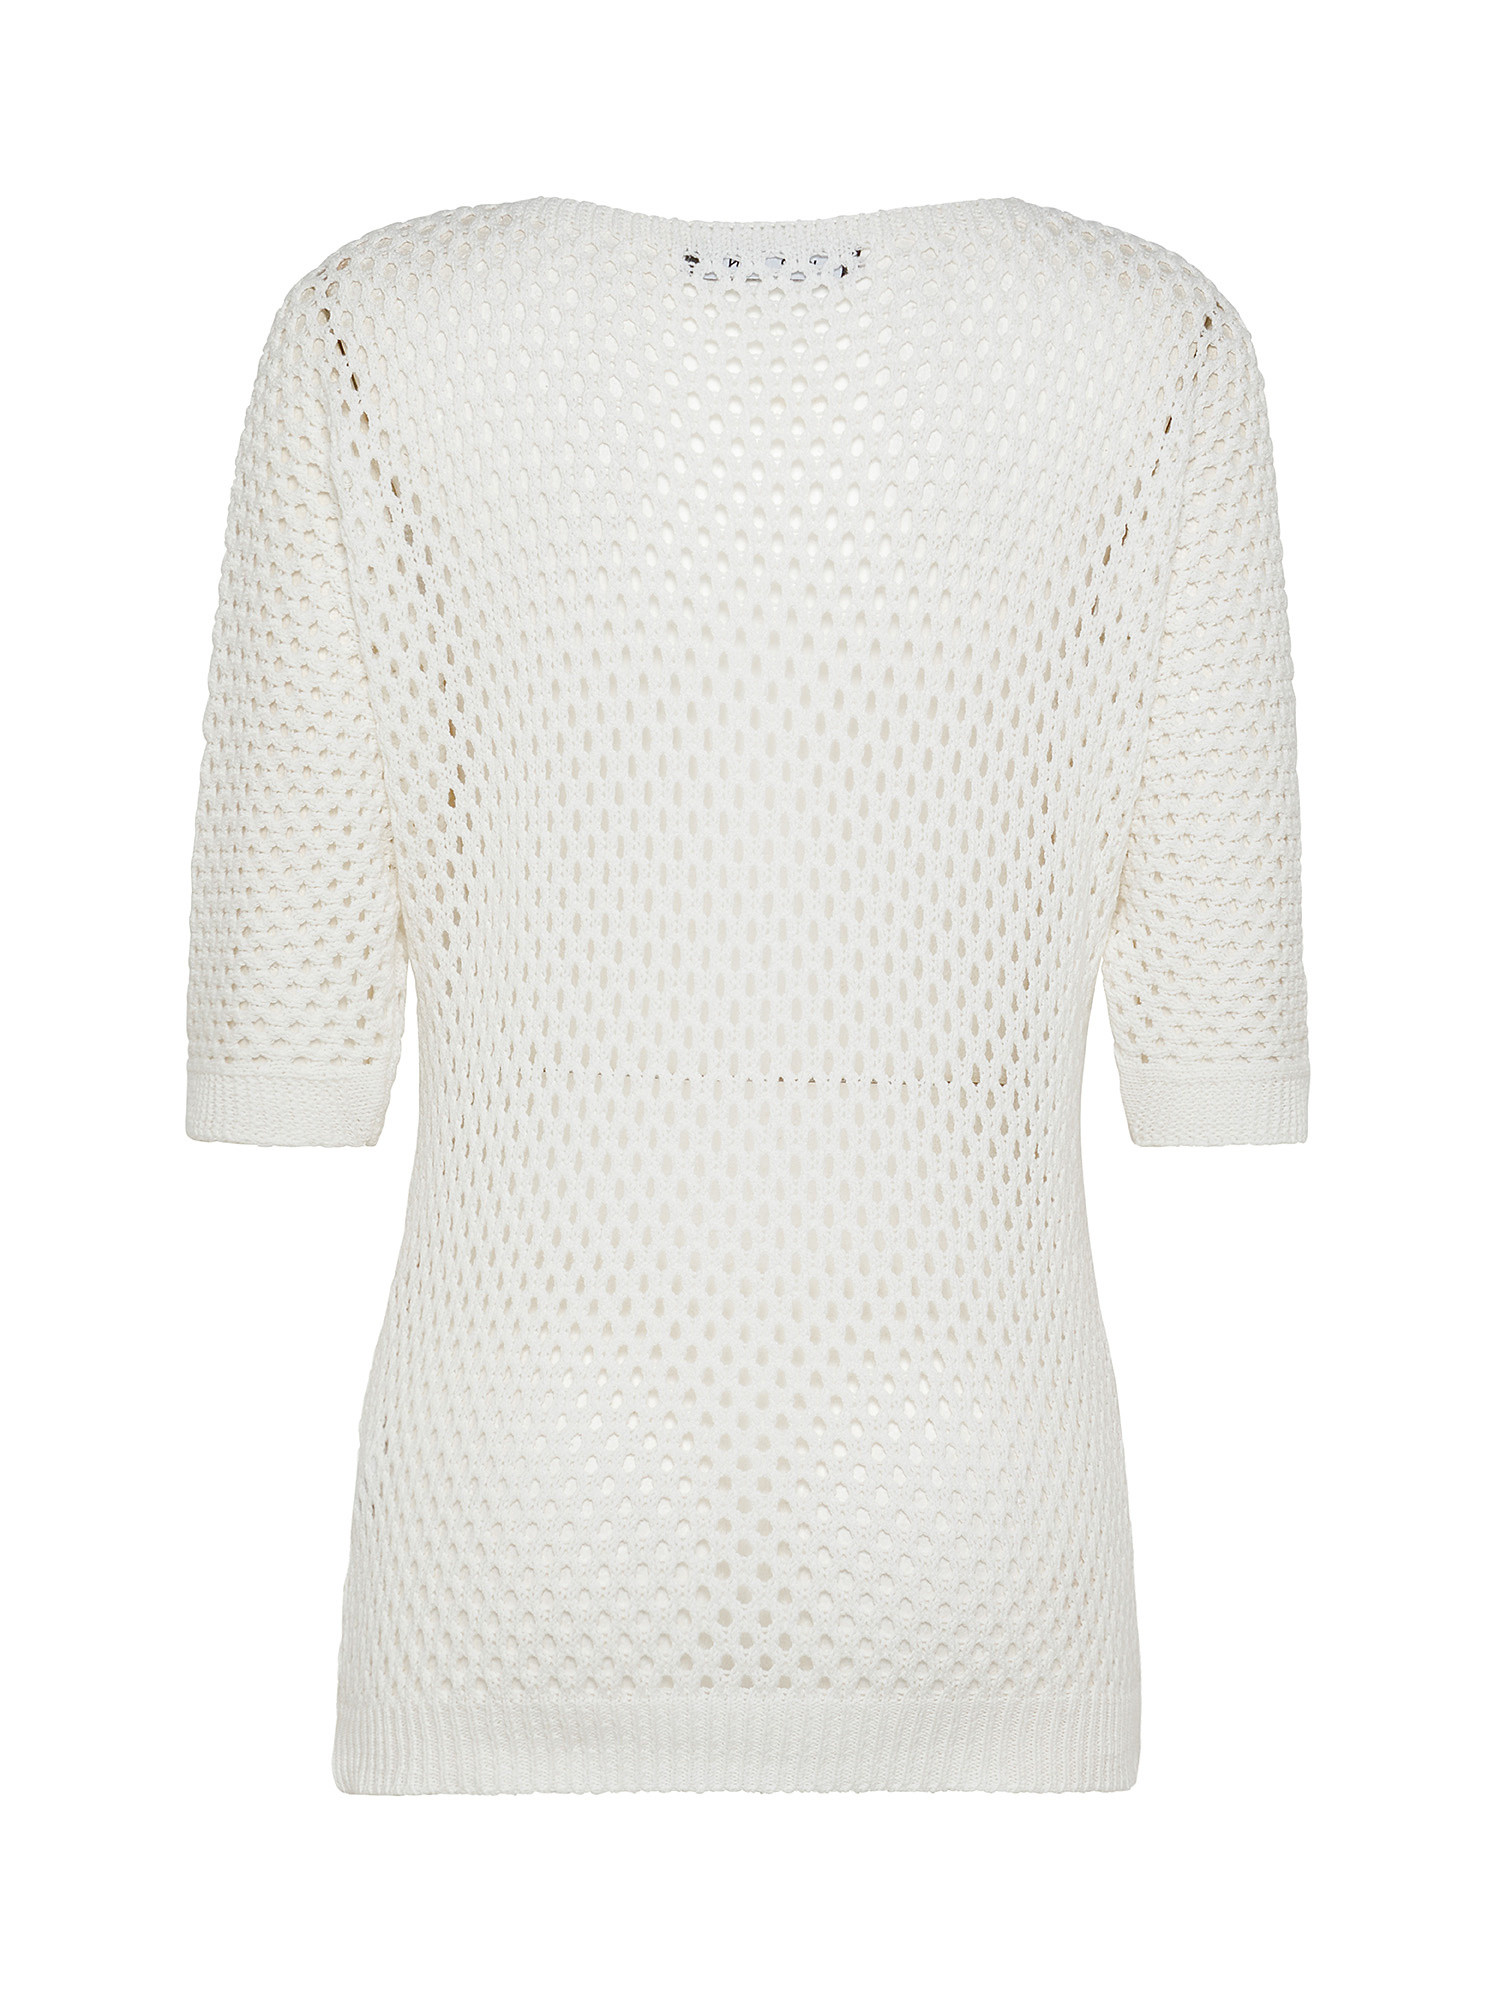 Perforated tricot sweater, White, large image number 1